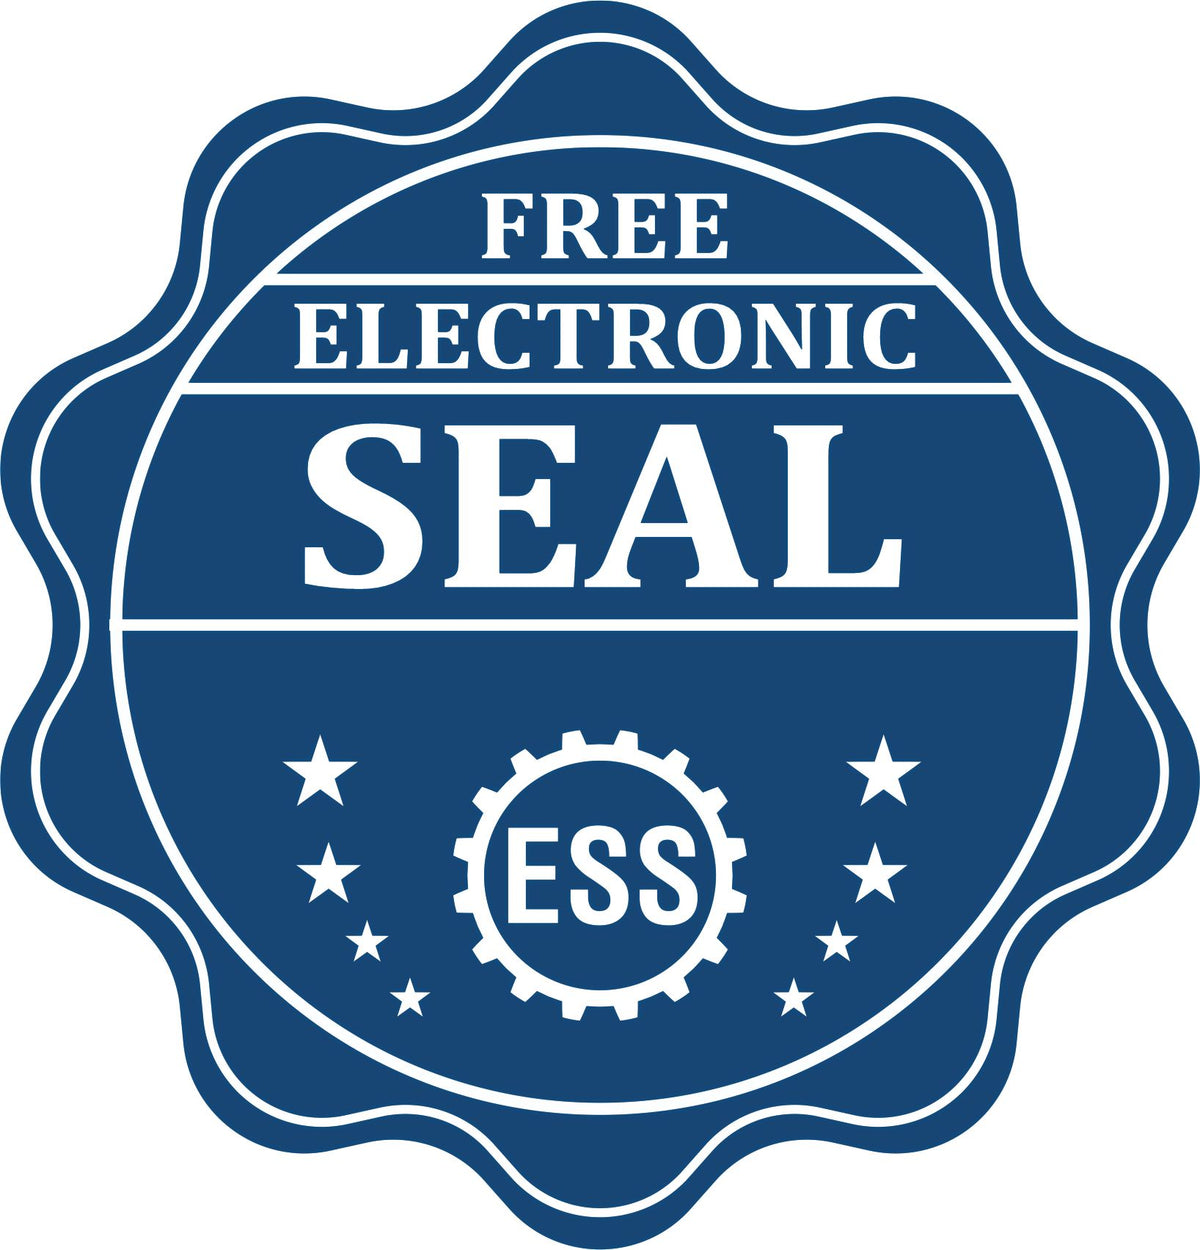 A badge showing a free electronic seal for the Wooden Handle Florida Rectangular Notary Public Stamp with stars and the ESS gear on the emblem.